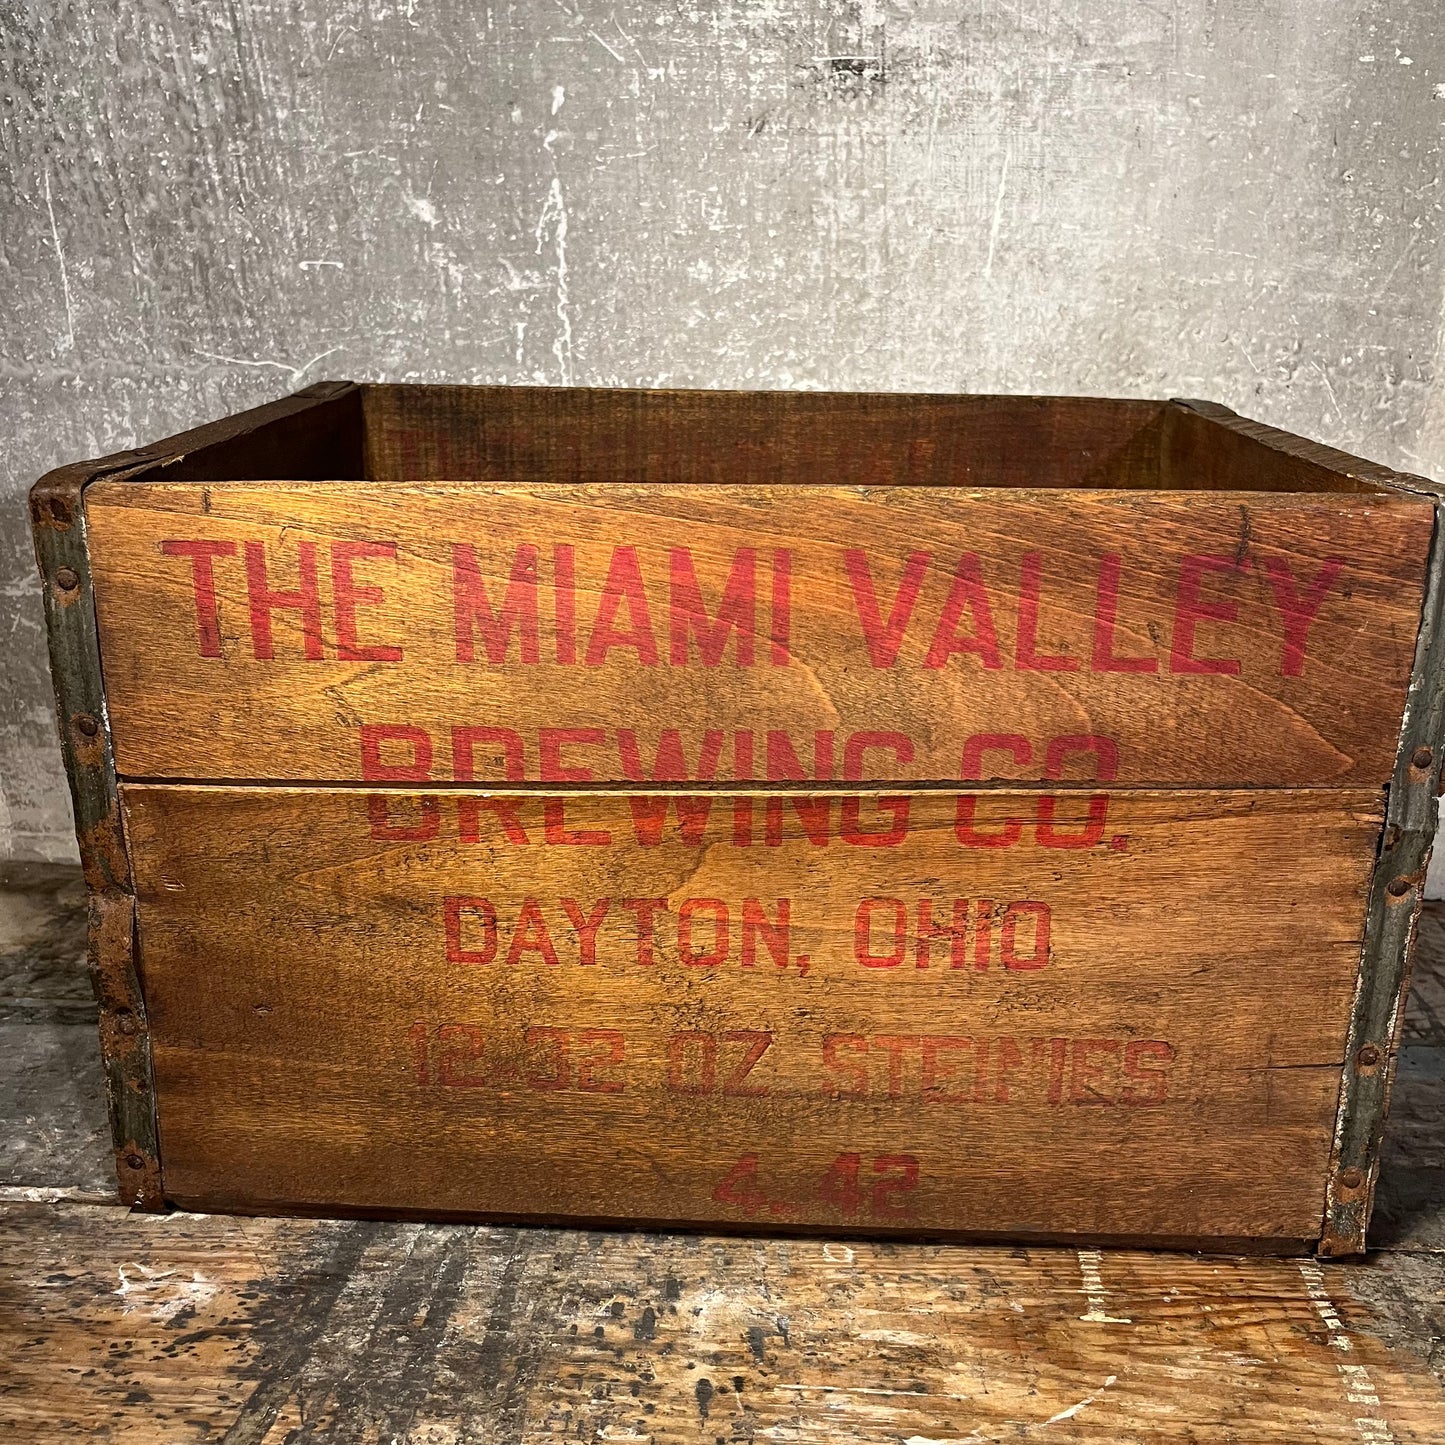 The Miami Valley Brewing Co. of Dayton, Ohio crate